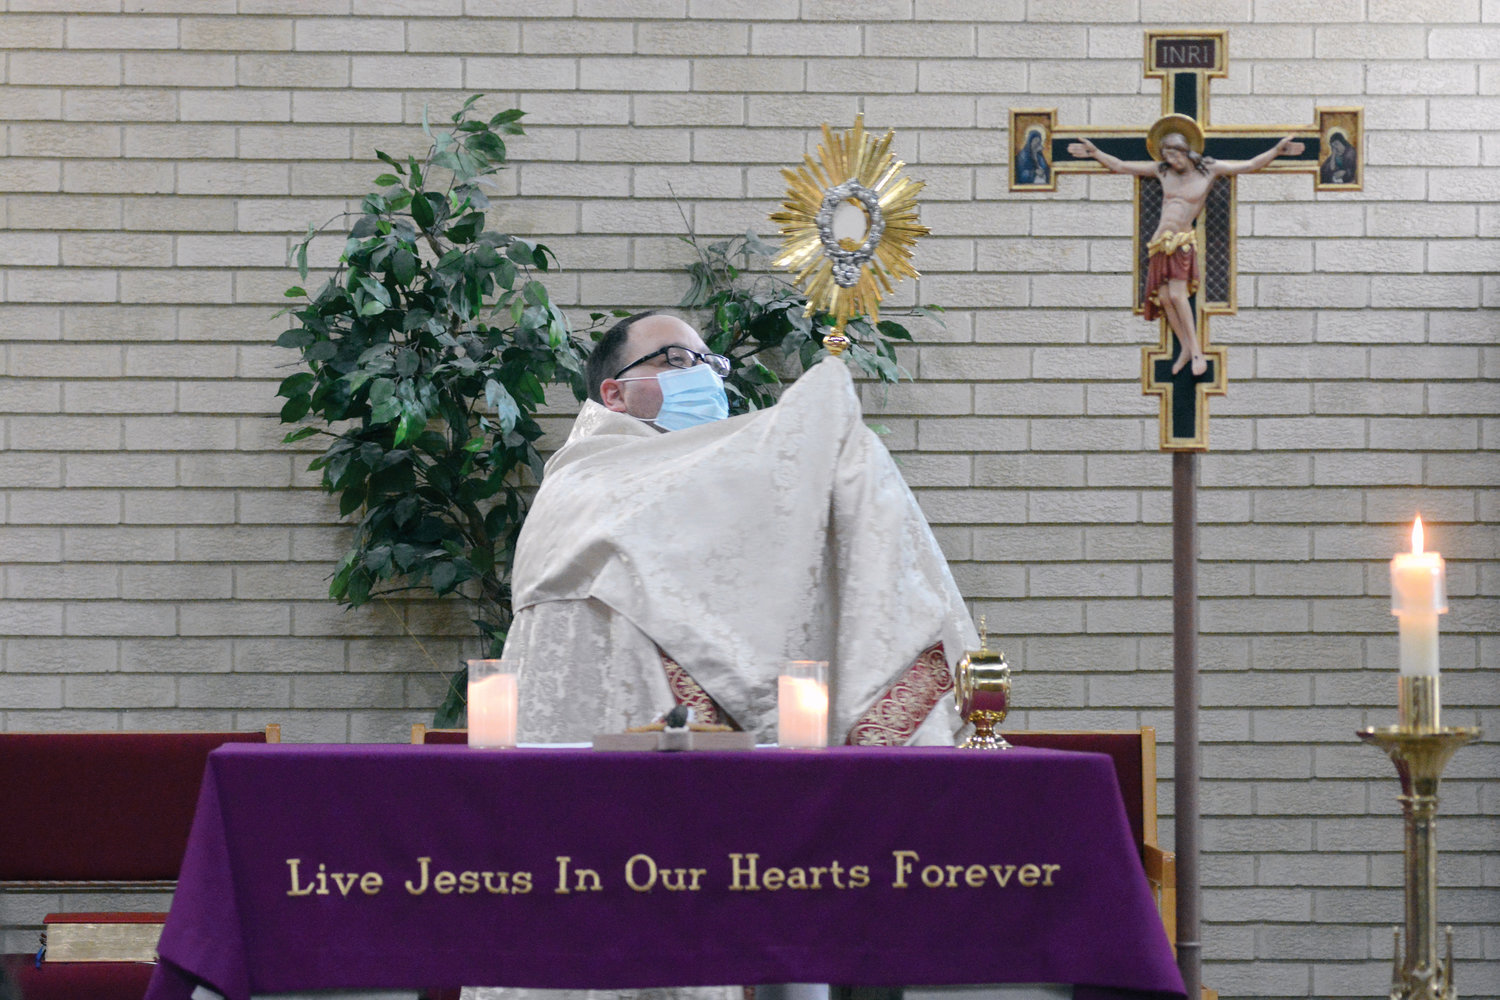 Father Cinnante elevates the monstrance holding the Eucharist.